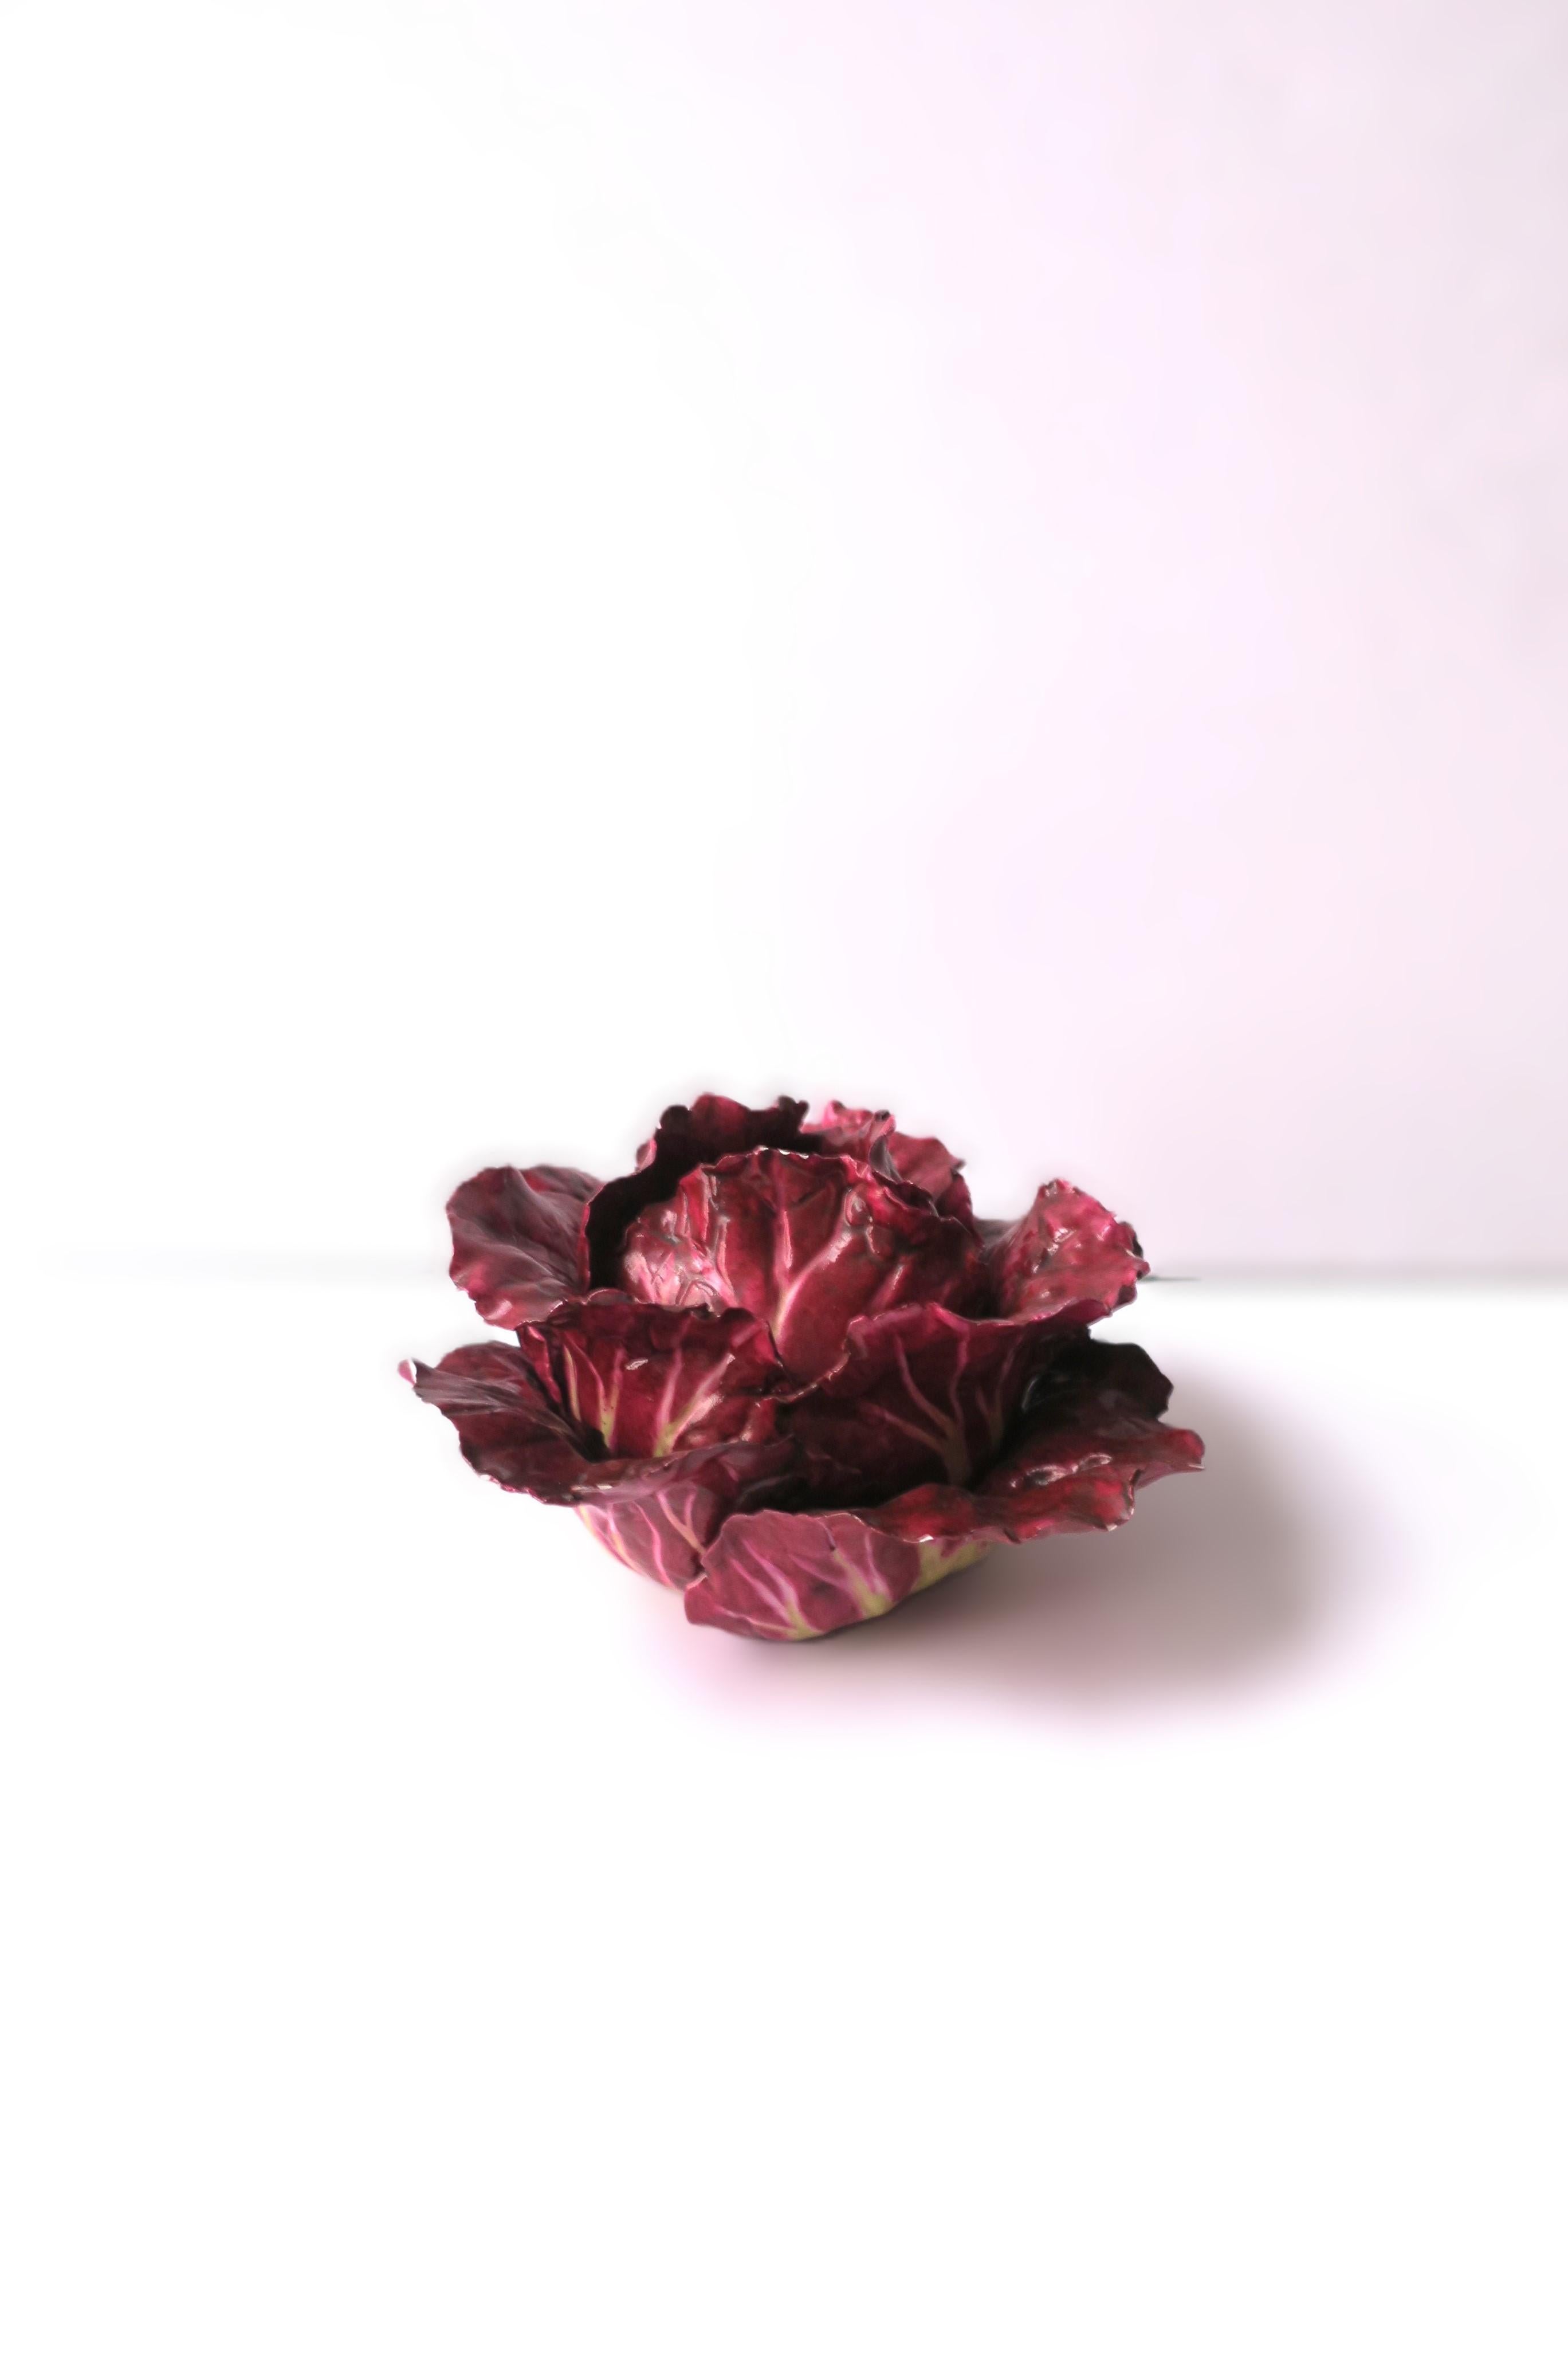 A very beautiful, one-of-a kind, red radicchio porcelain lettuce ware/lettuce leaf head sculpture by artist/sculptor, Katherine Houston, circa late-20th century, USA. In the Trompe L'Oeil style. Beautifully designed, handmade and hand painted, hard